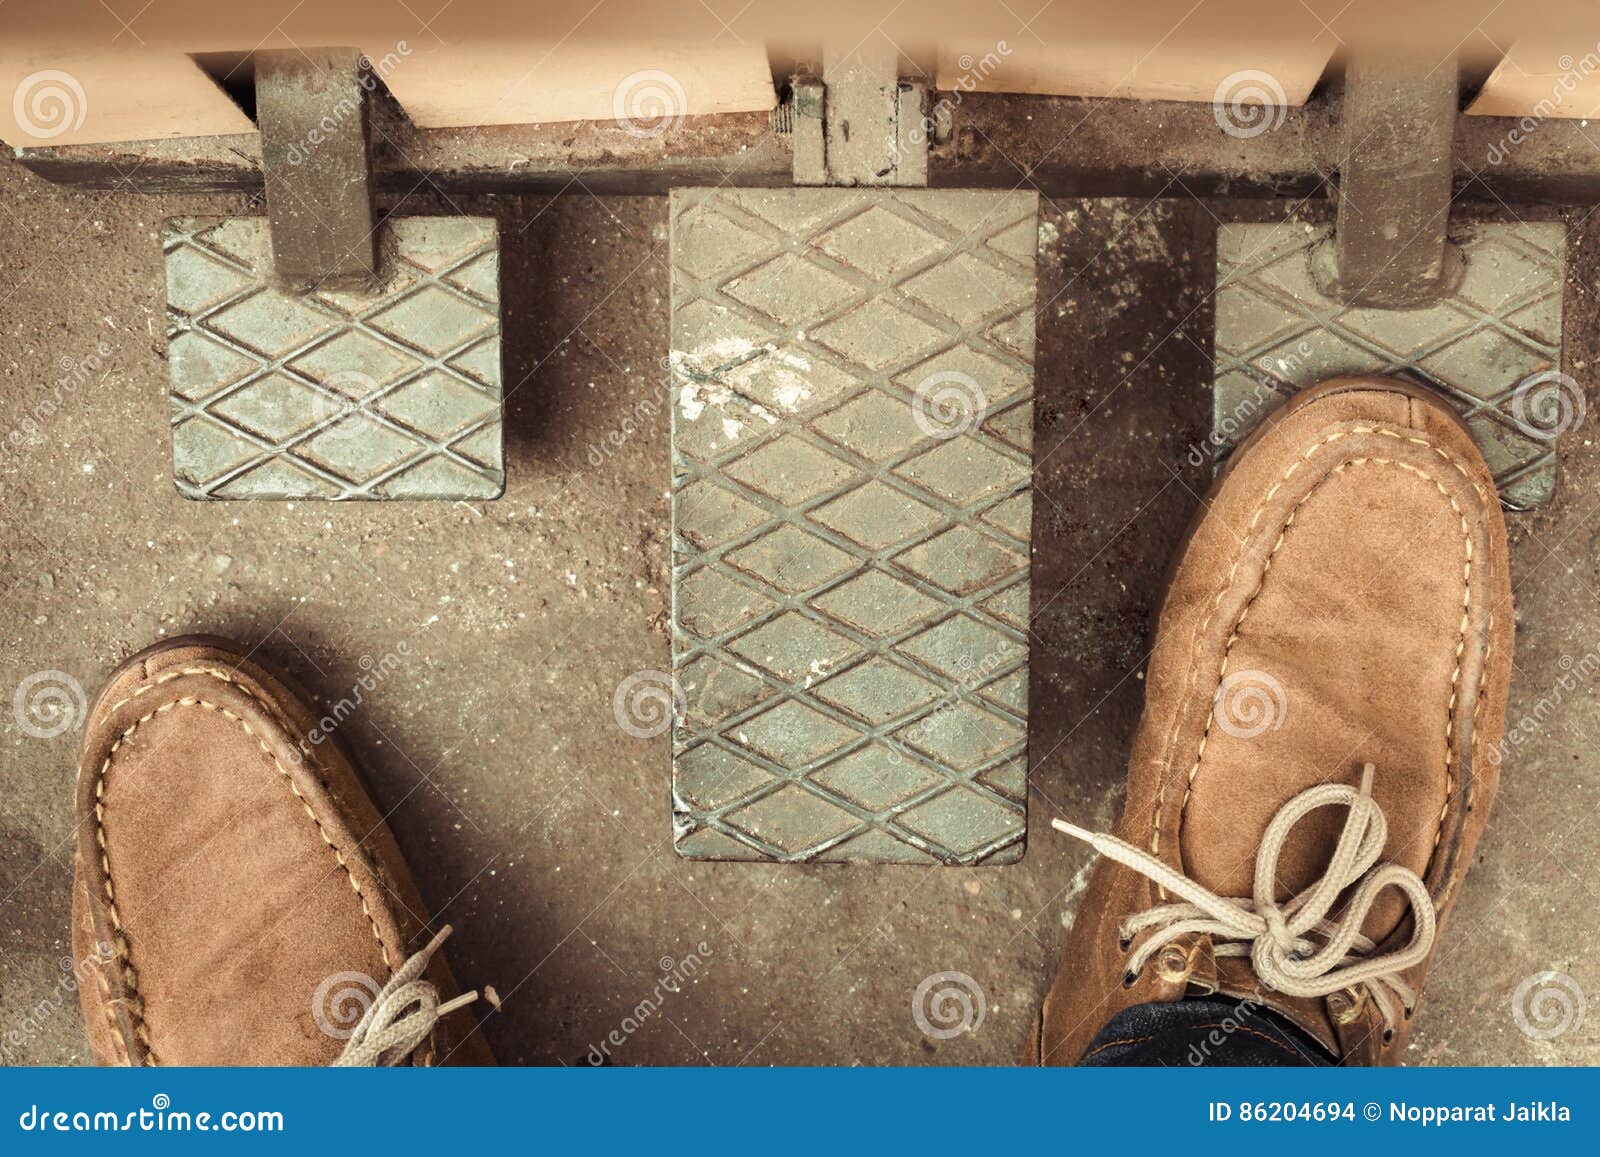 Testing Stepping on Car Gas Pedal Stock Photo - Image of fossil, tail ...